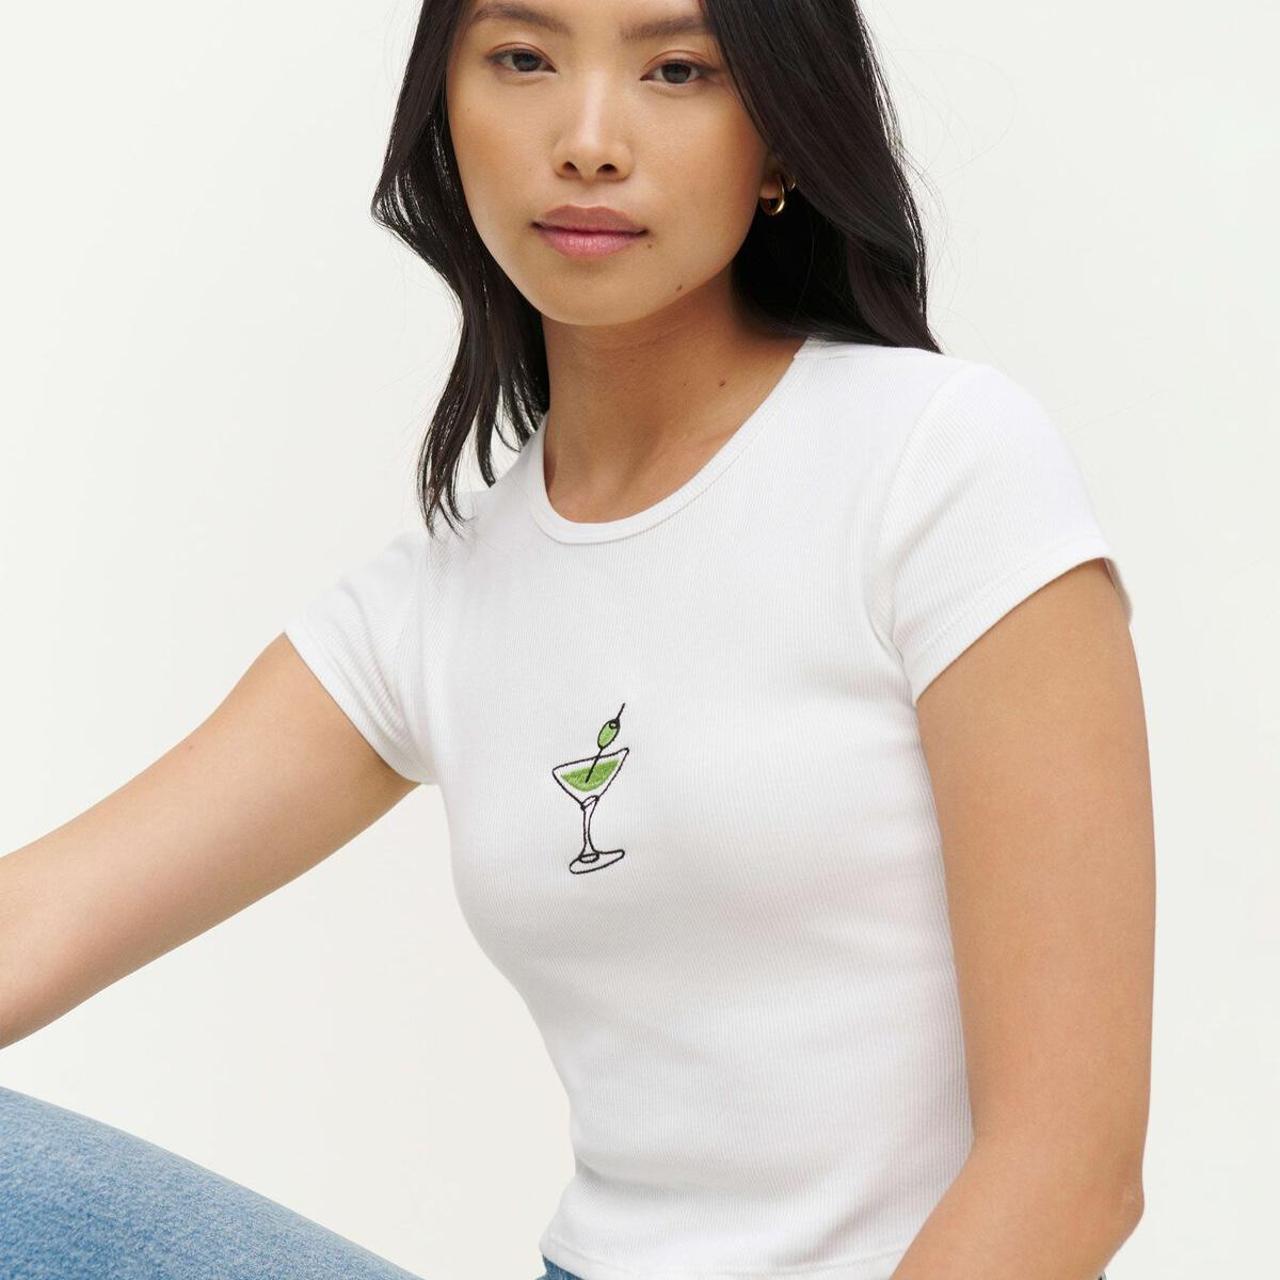 Reformation Women's White and Green T-shirt